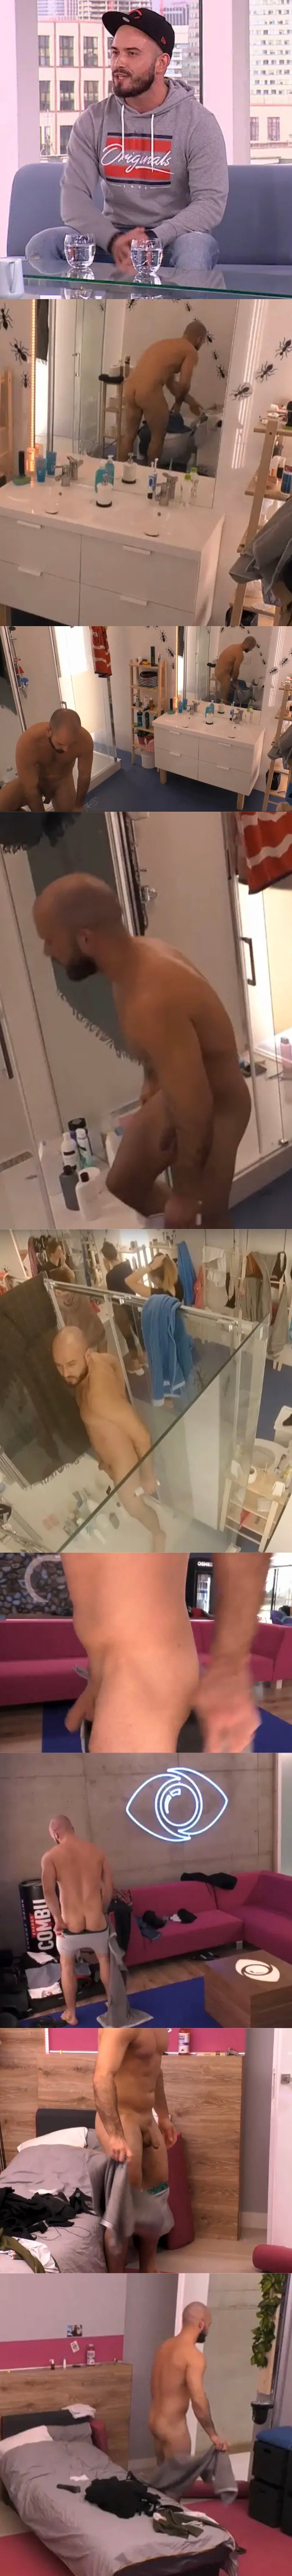 Majiec full frontal naked in Big Brother Poland